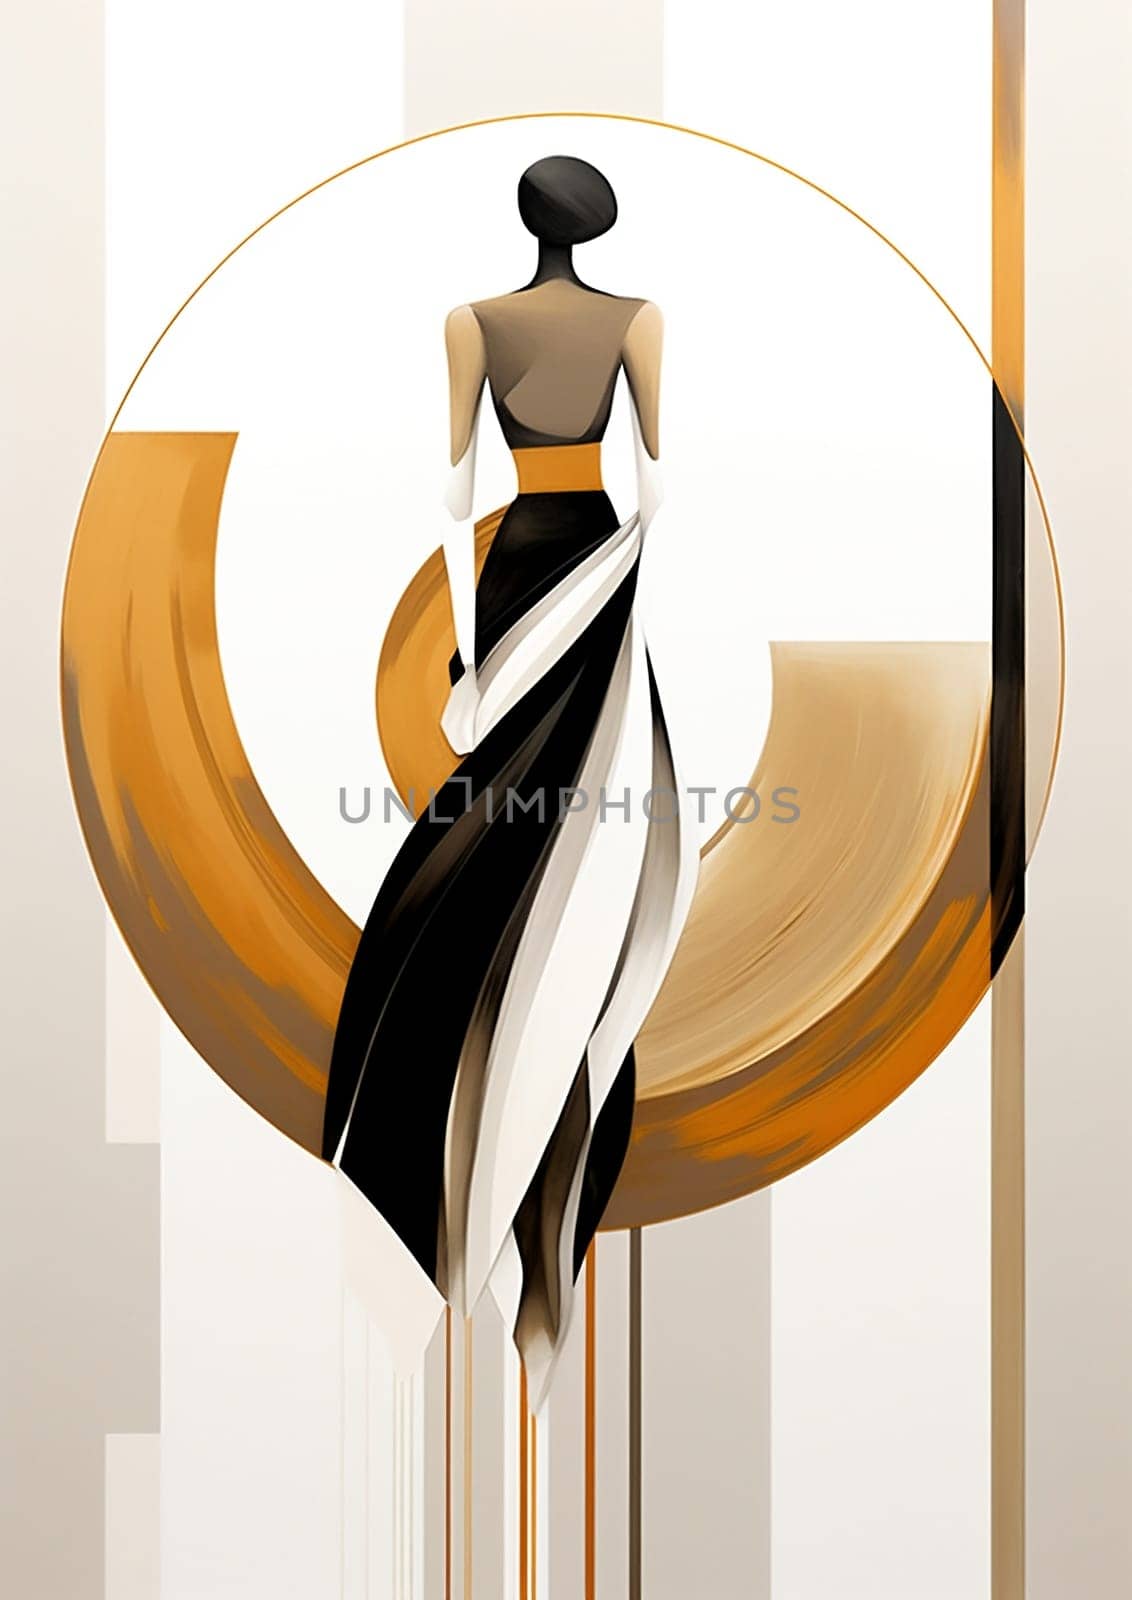 Art beauty clothes draw illustration graphic vogue outline young design style glamour elegance person female dress abstract women background lady model fashionable